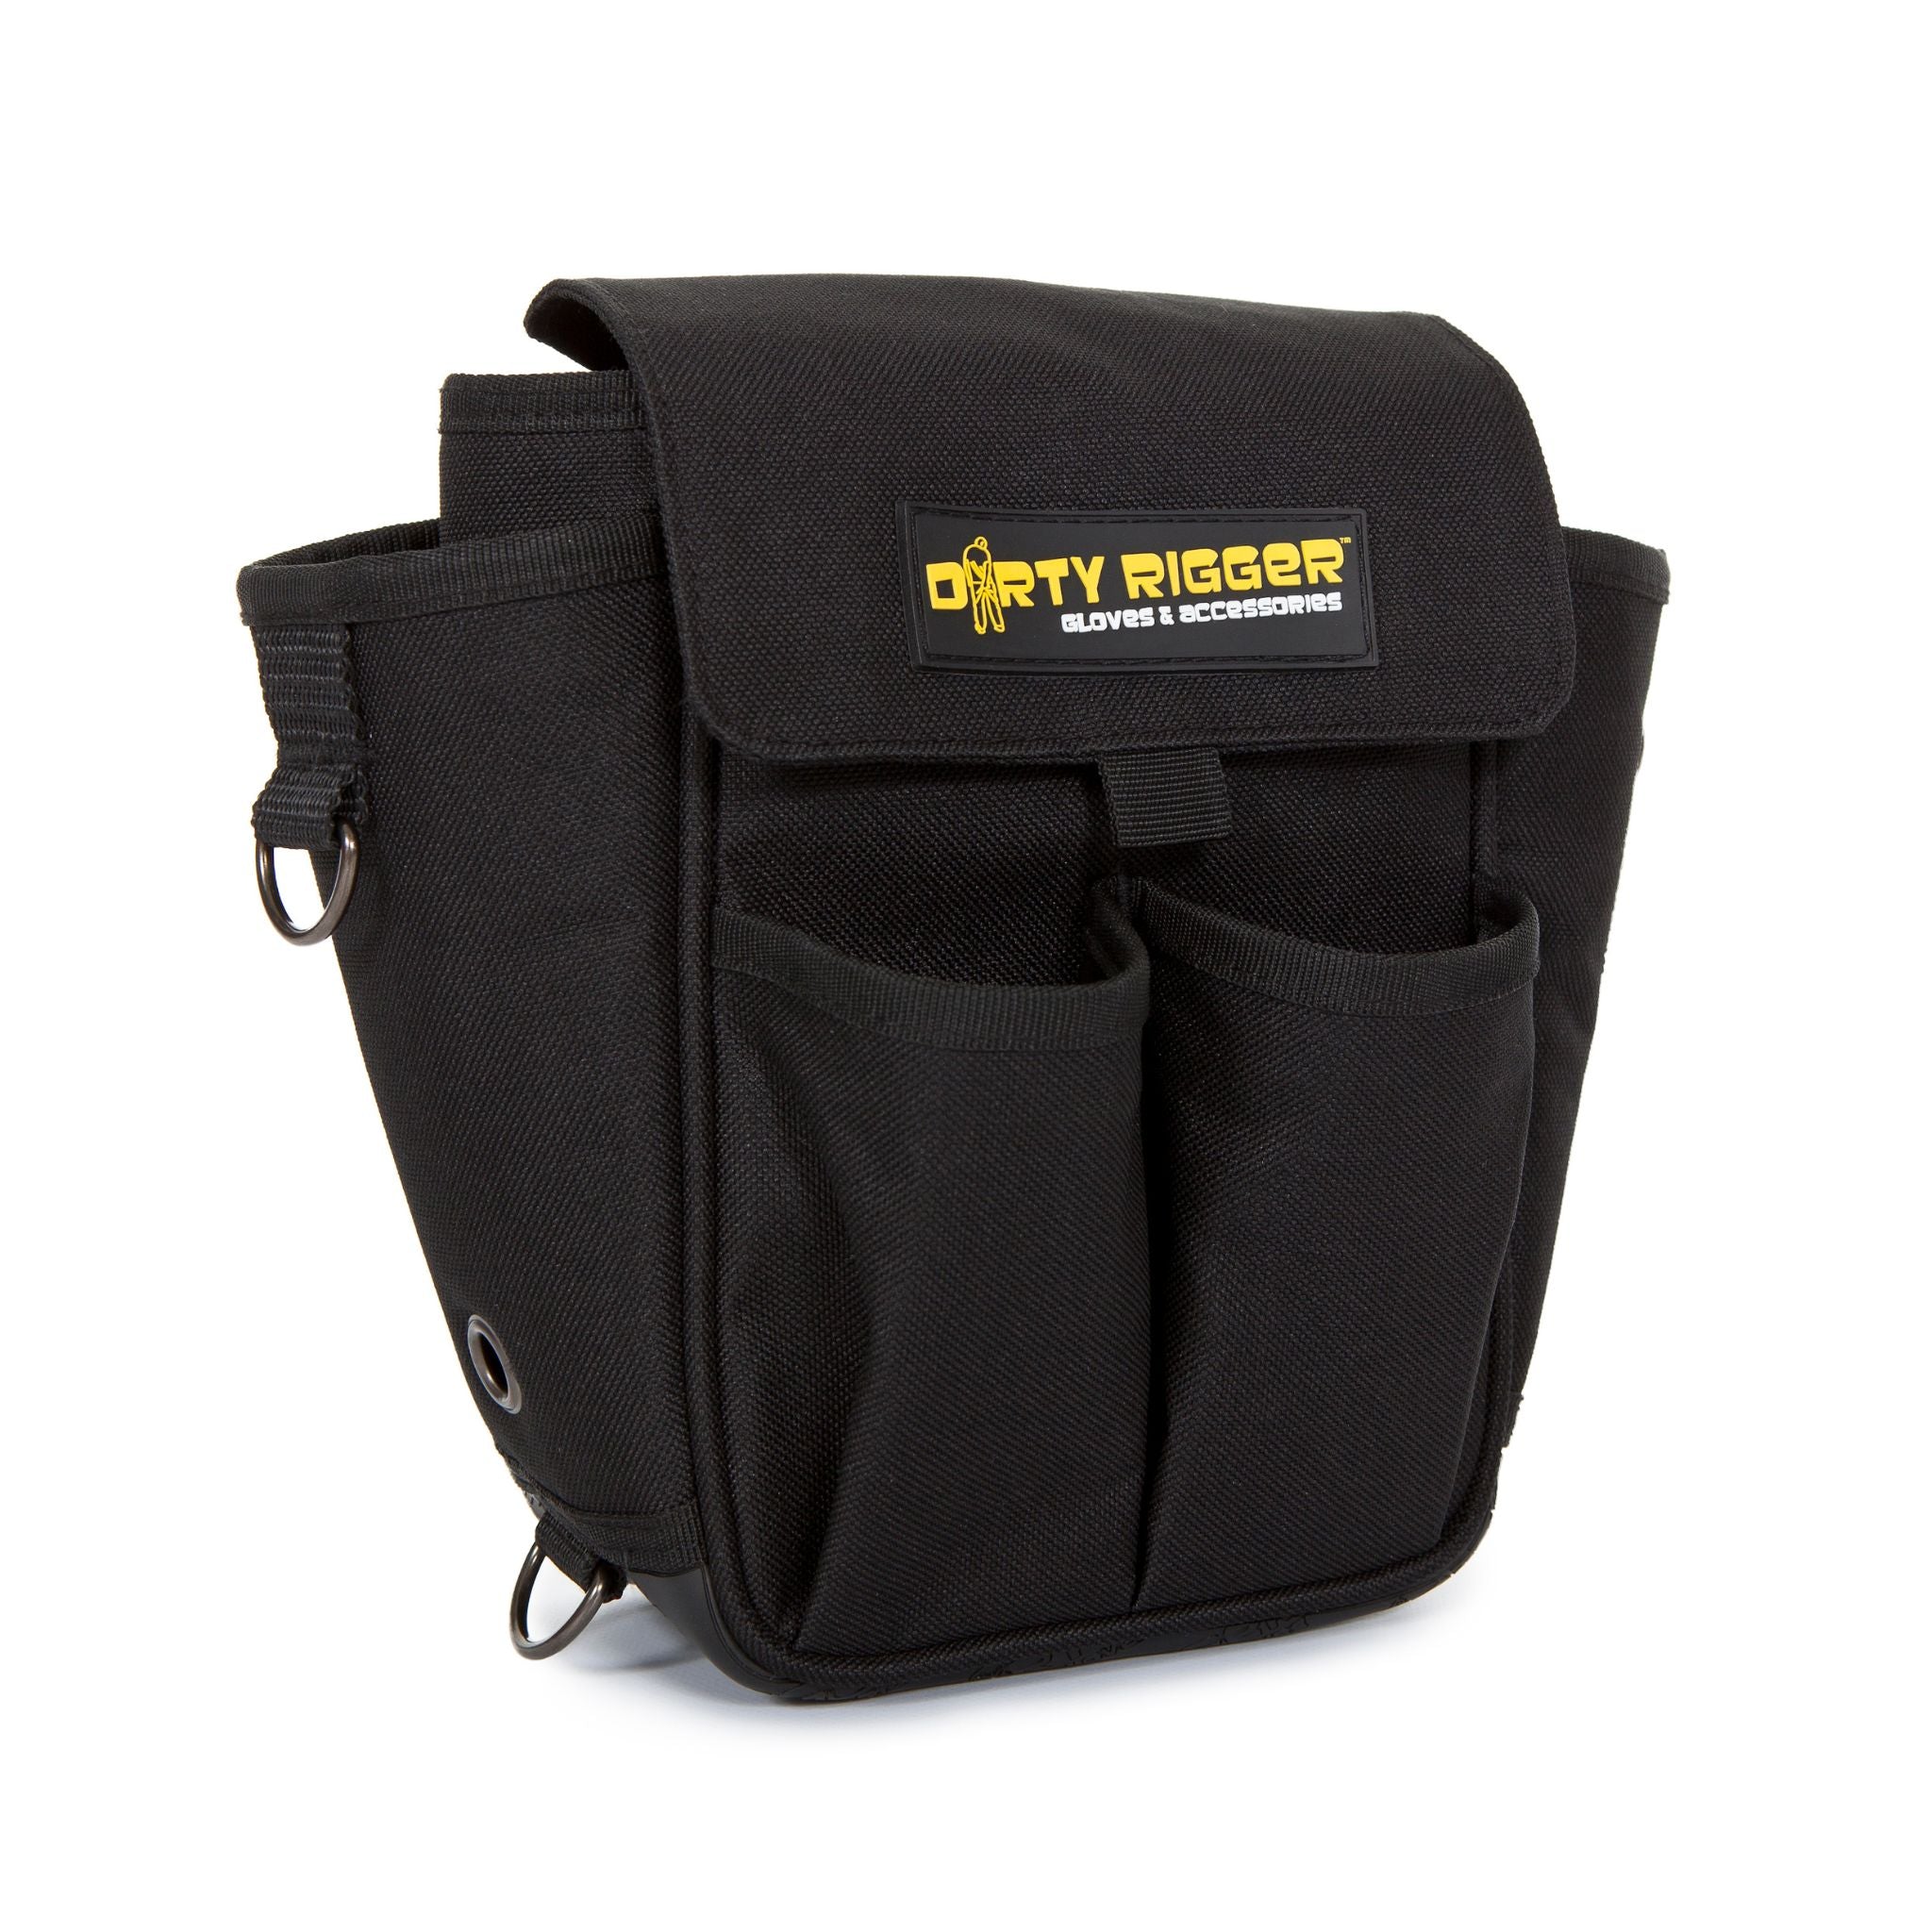 Stagehand tech pouch with tool pockets and d-rings